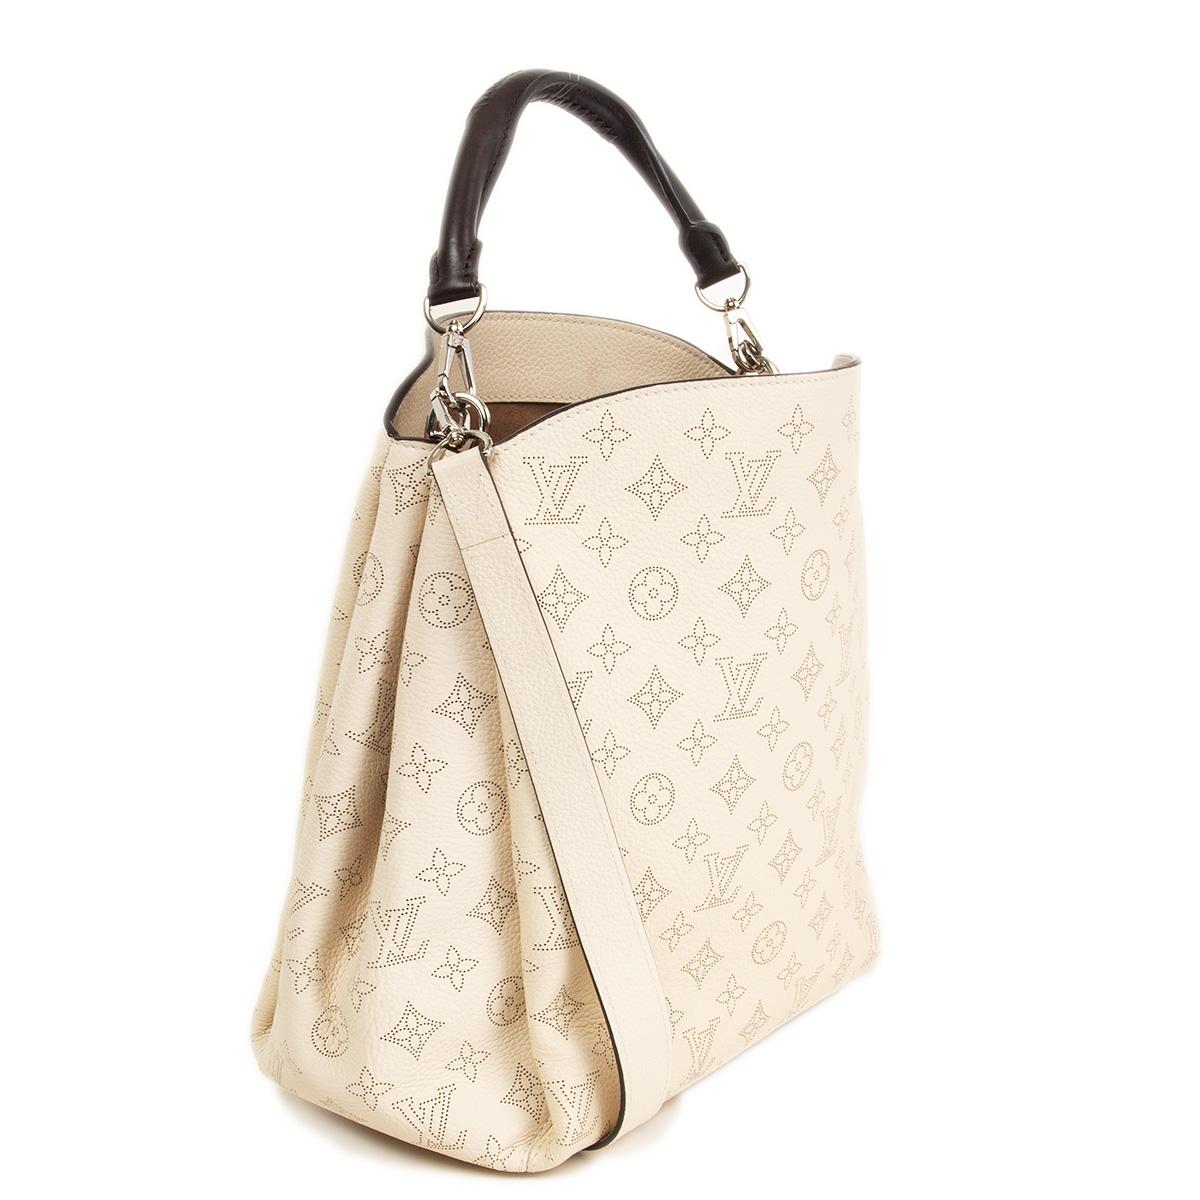 100% authentic Louis Vuitton 'Babylone PM' hobo in Galet (pale beige) Mongram Mahina leather with dark brown braided handle and detachable leather shoulder strap. Lined in taupe alcanthara with two open pockets against the front and a zipper pocket